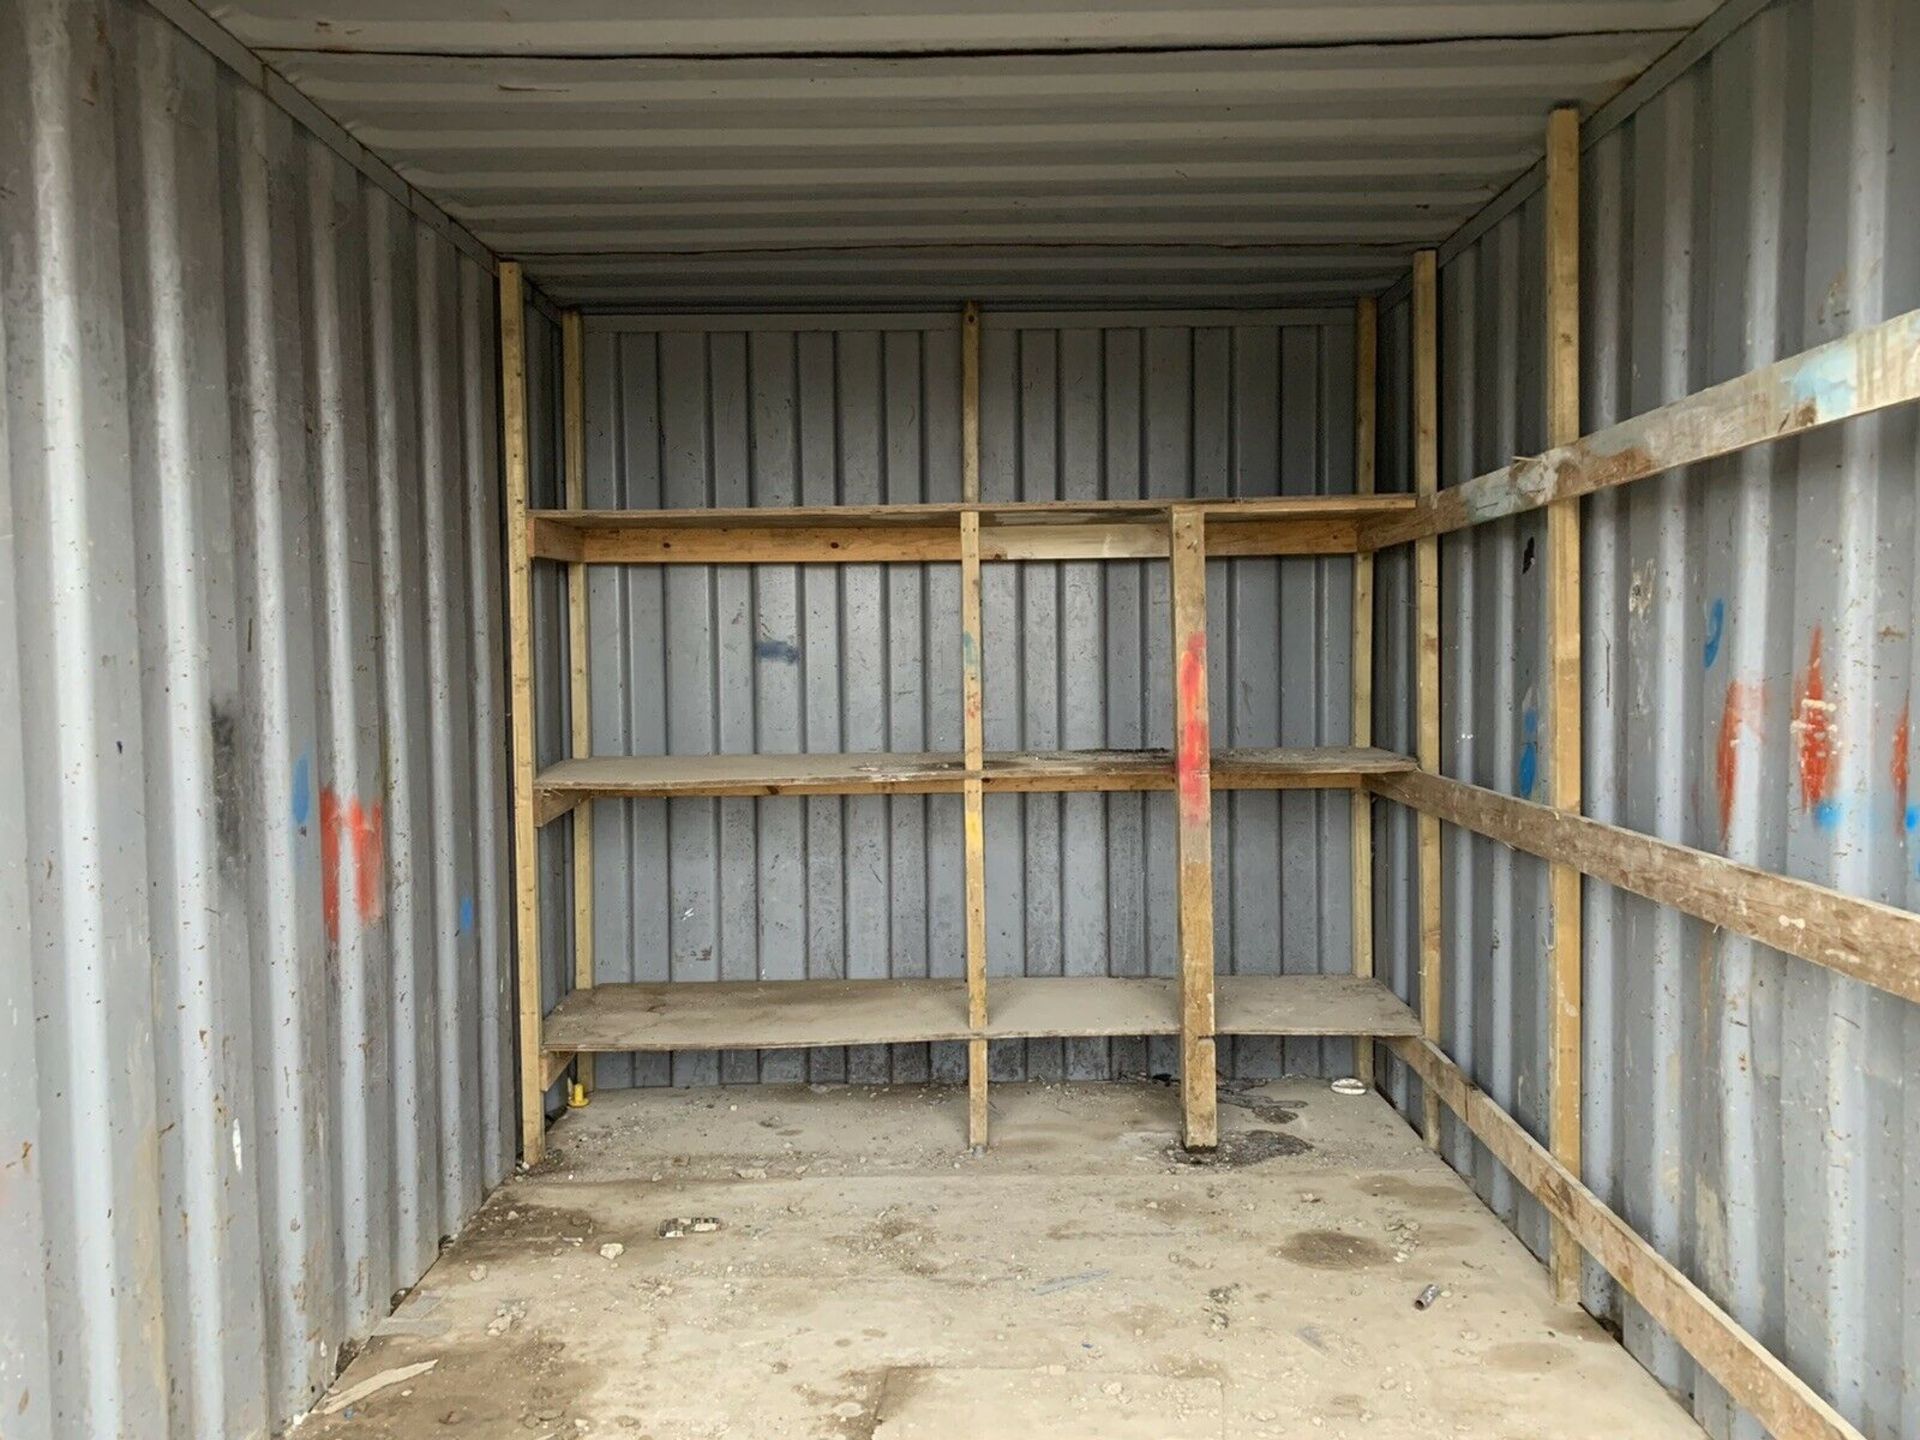 Office / Storage Container Anti Vandal Steel Portable Building 20ft x 8ft - Image 6 of 11